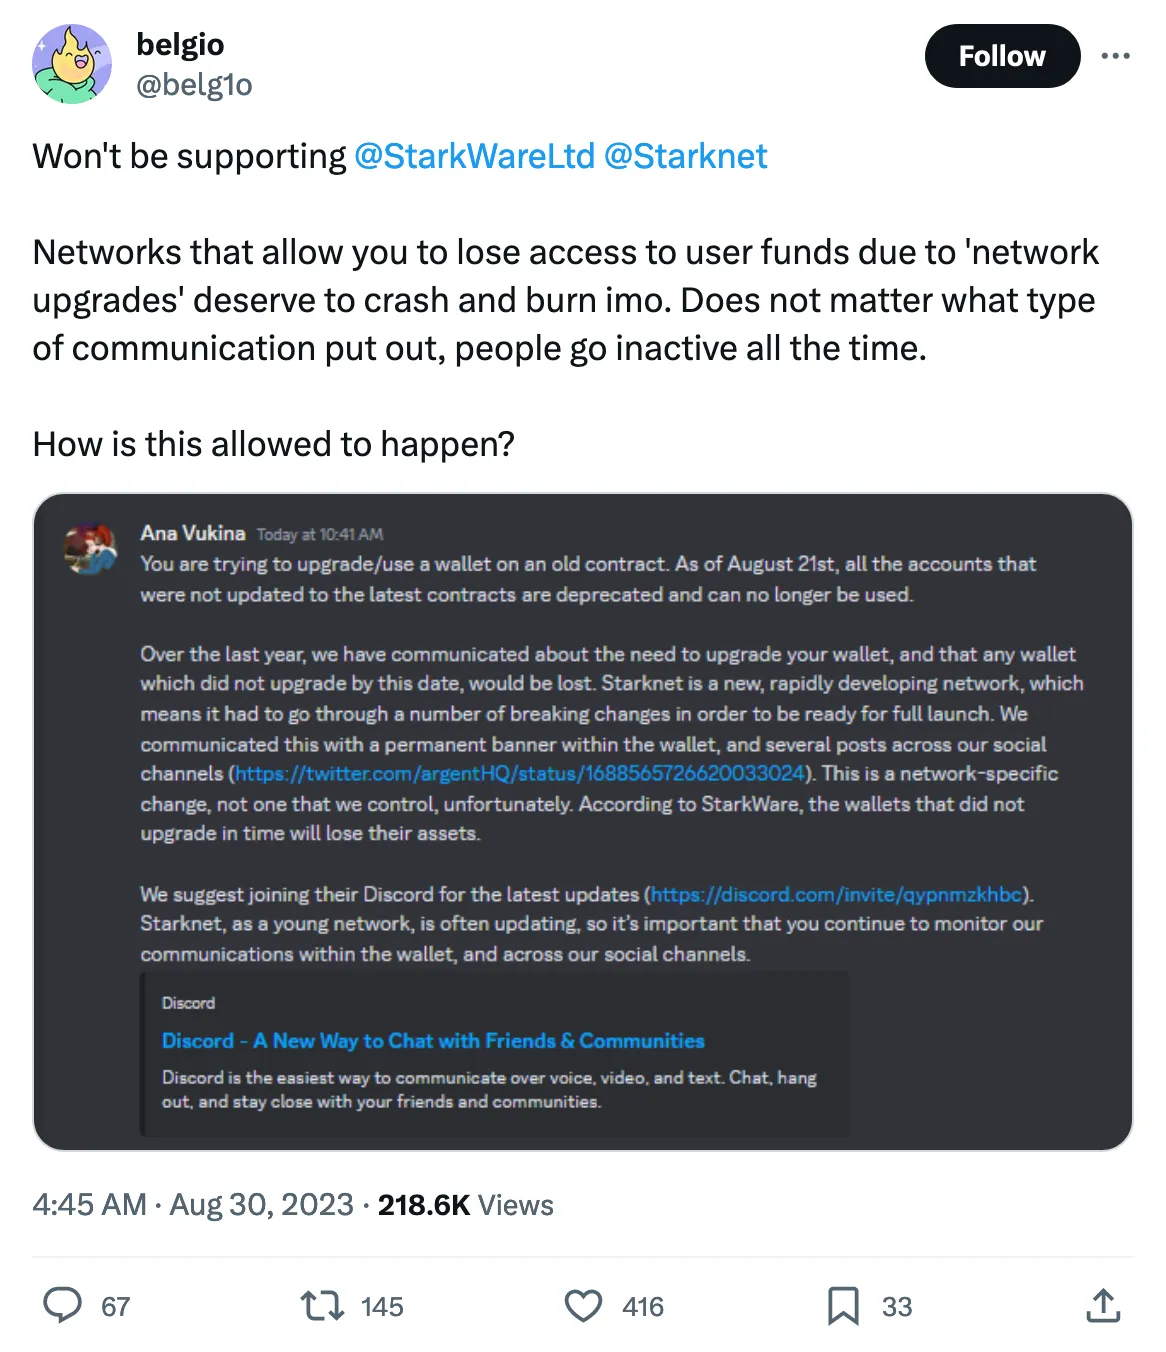 Won't be supporting 
@StarkWareLtd
 @Starknet
 

Networks that allow you to lose access to user funds due to 'network upgrades' deserve to crash and burn imo. Does not matter what type of communication put out, people go inactive all the time.

How is this allowed to happen? 
Tweeted at 4:45 AM · Aug 30, 2023